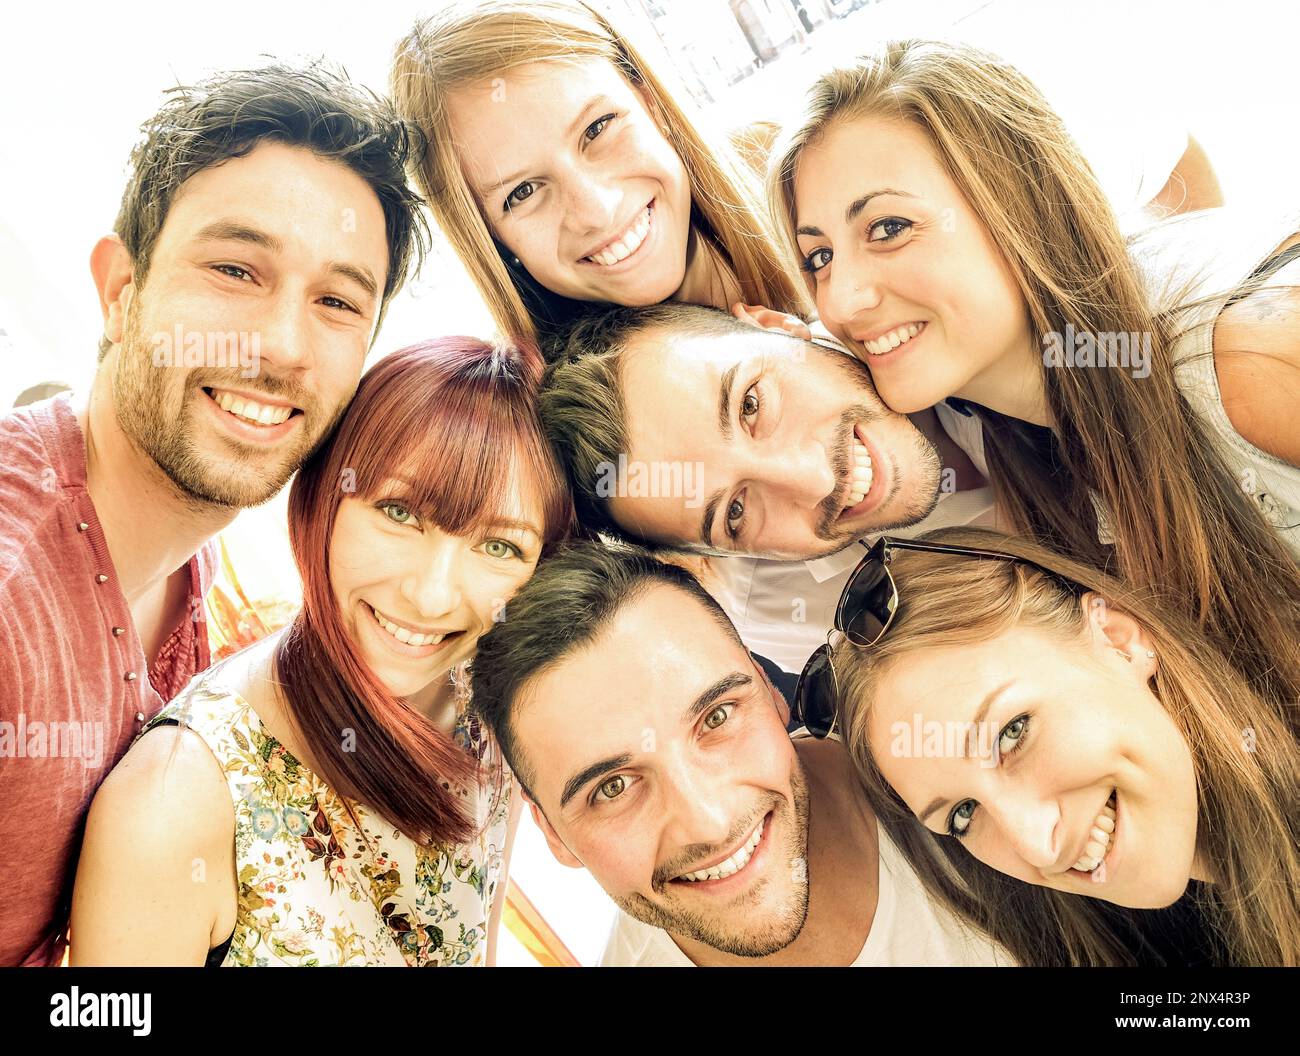 Happy best friends taking selfie outdoors with spring time backlighting - Friendship and happiness concept with young people having fun together Stock Photo